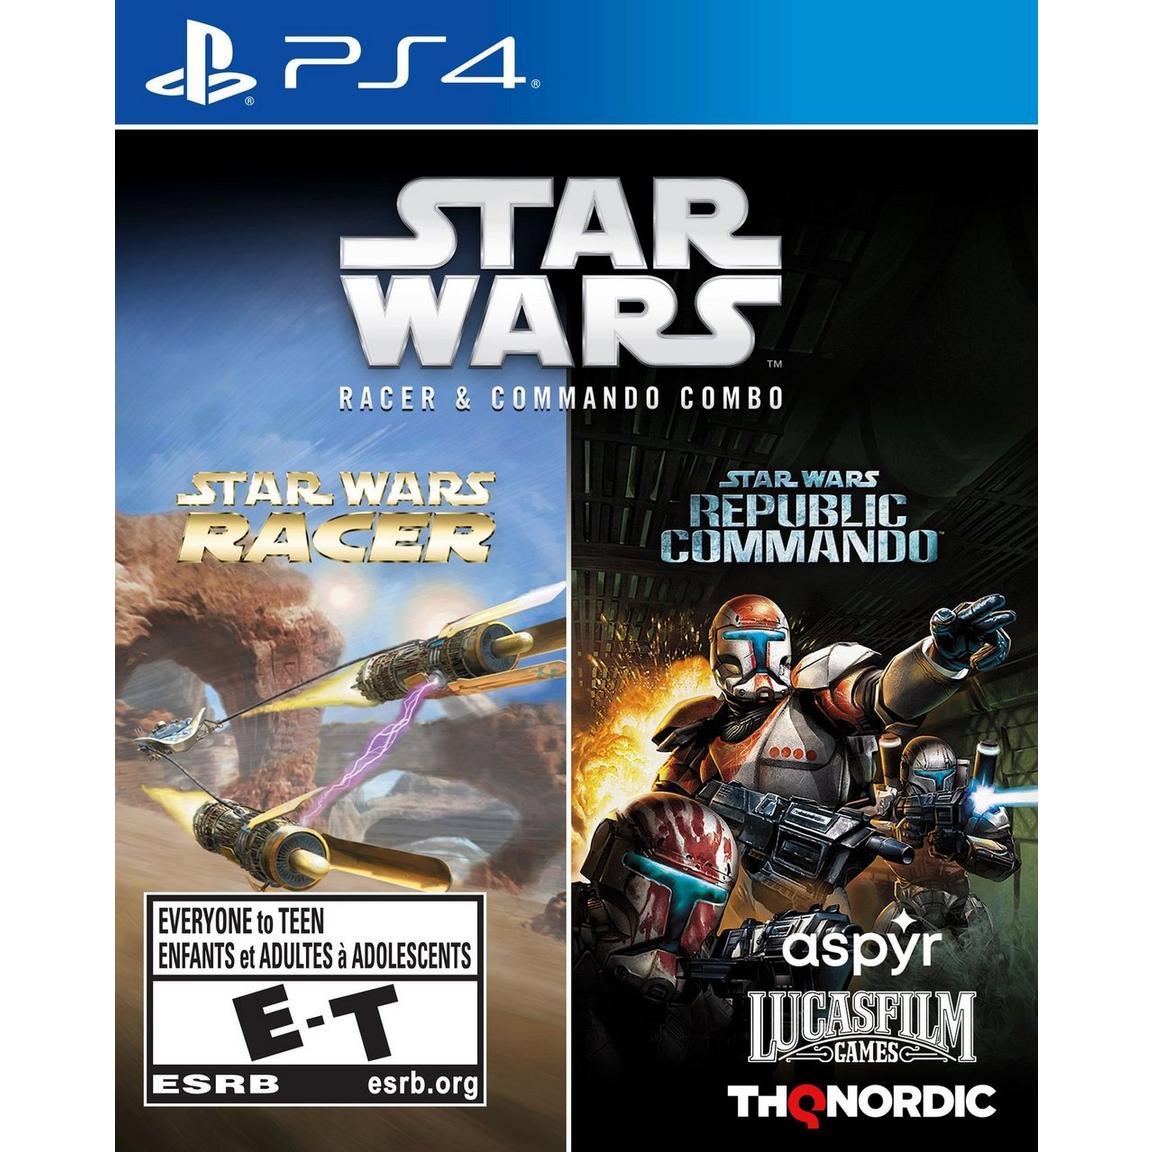 Gamestop: Save Up To $35 On Select Star Wars Video Games + Free Shipping Over $35